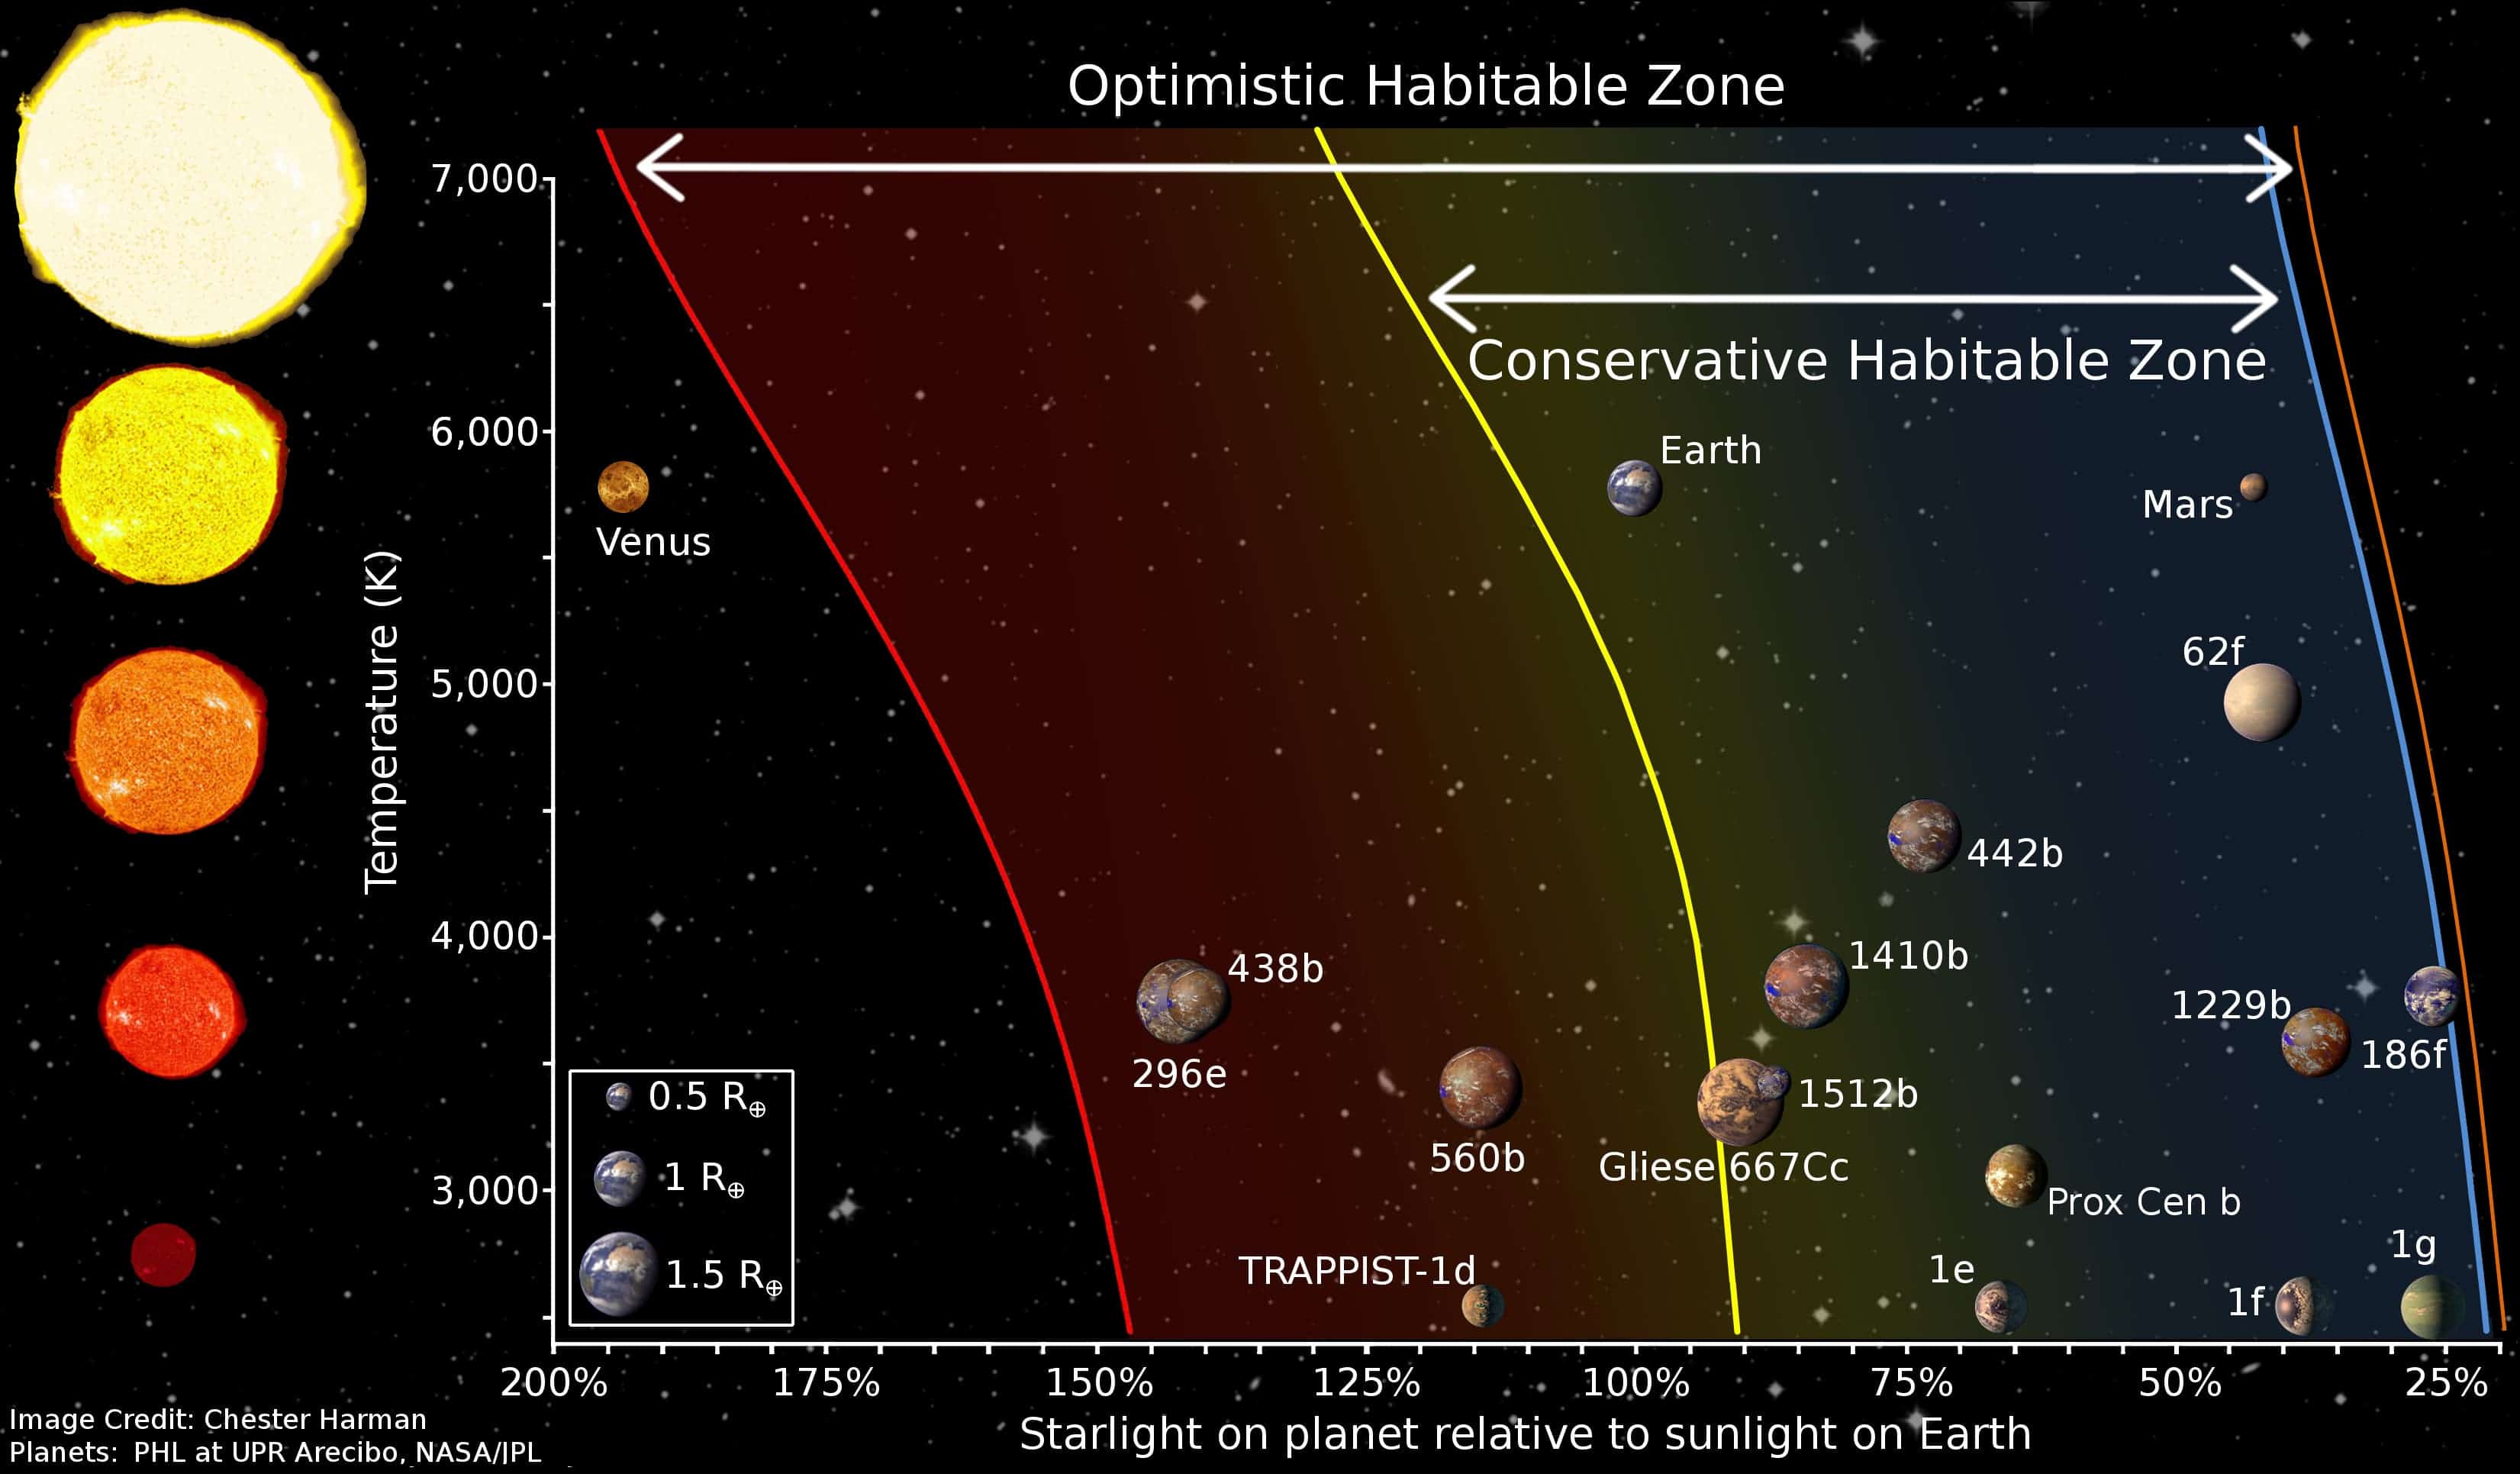 X-Rays could sterilise alien planets that would be otherwise habitable